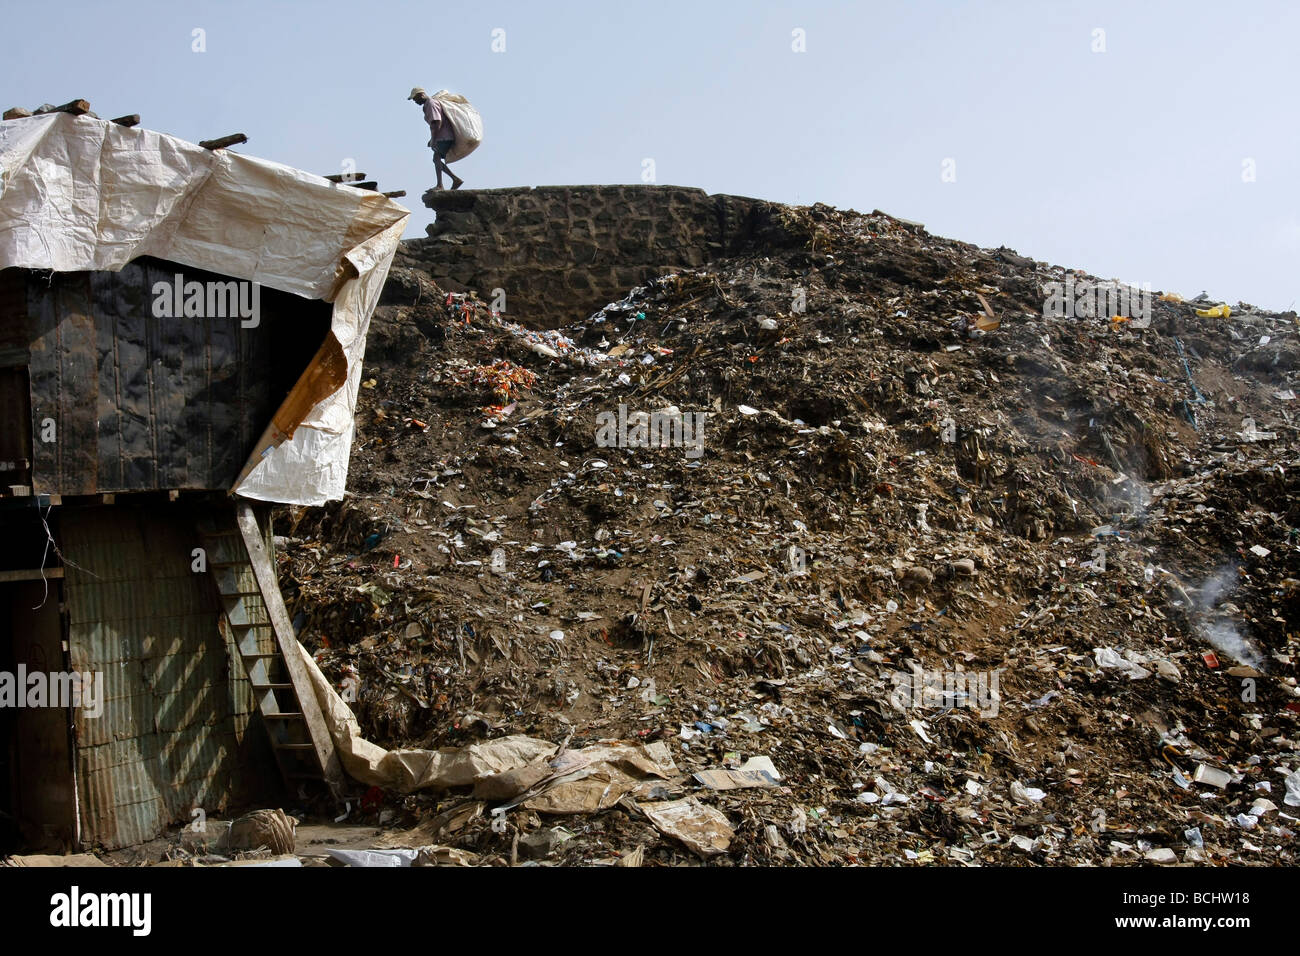 A man is looking for valuable materials in a garbage dump in the Dharavi slum are in Mumbai (Bombay) in India. Stock Photo